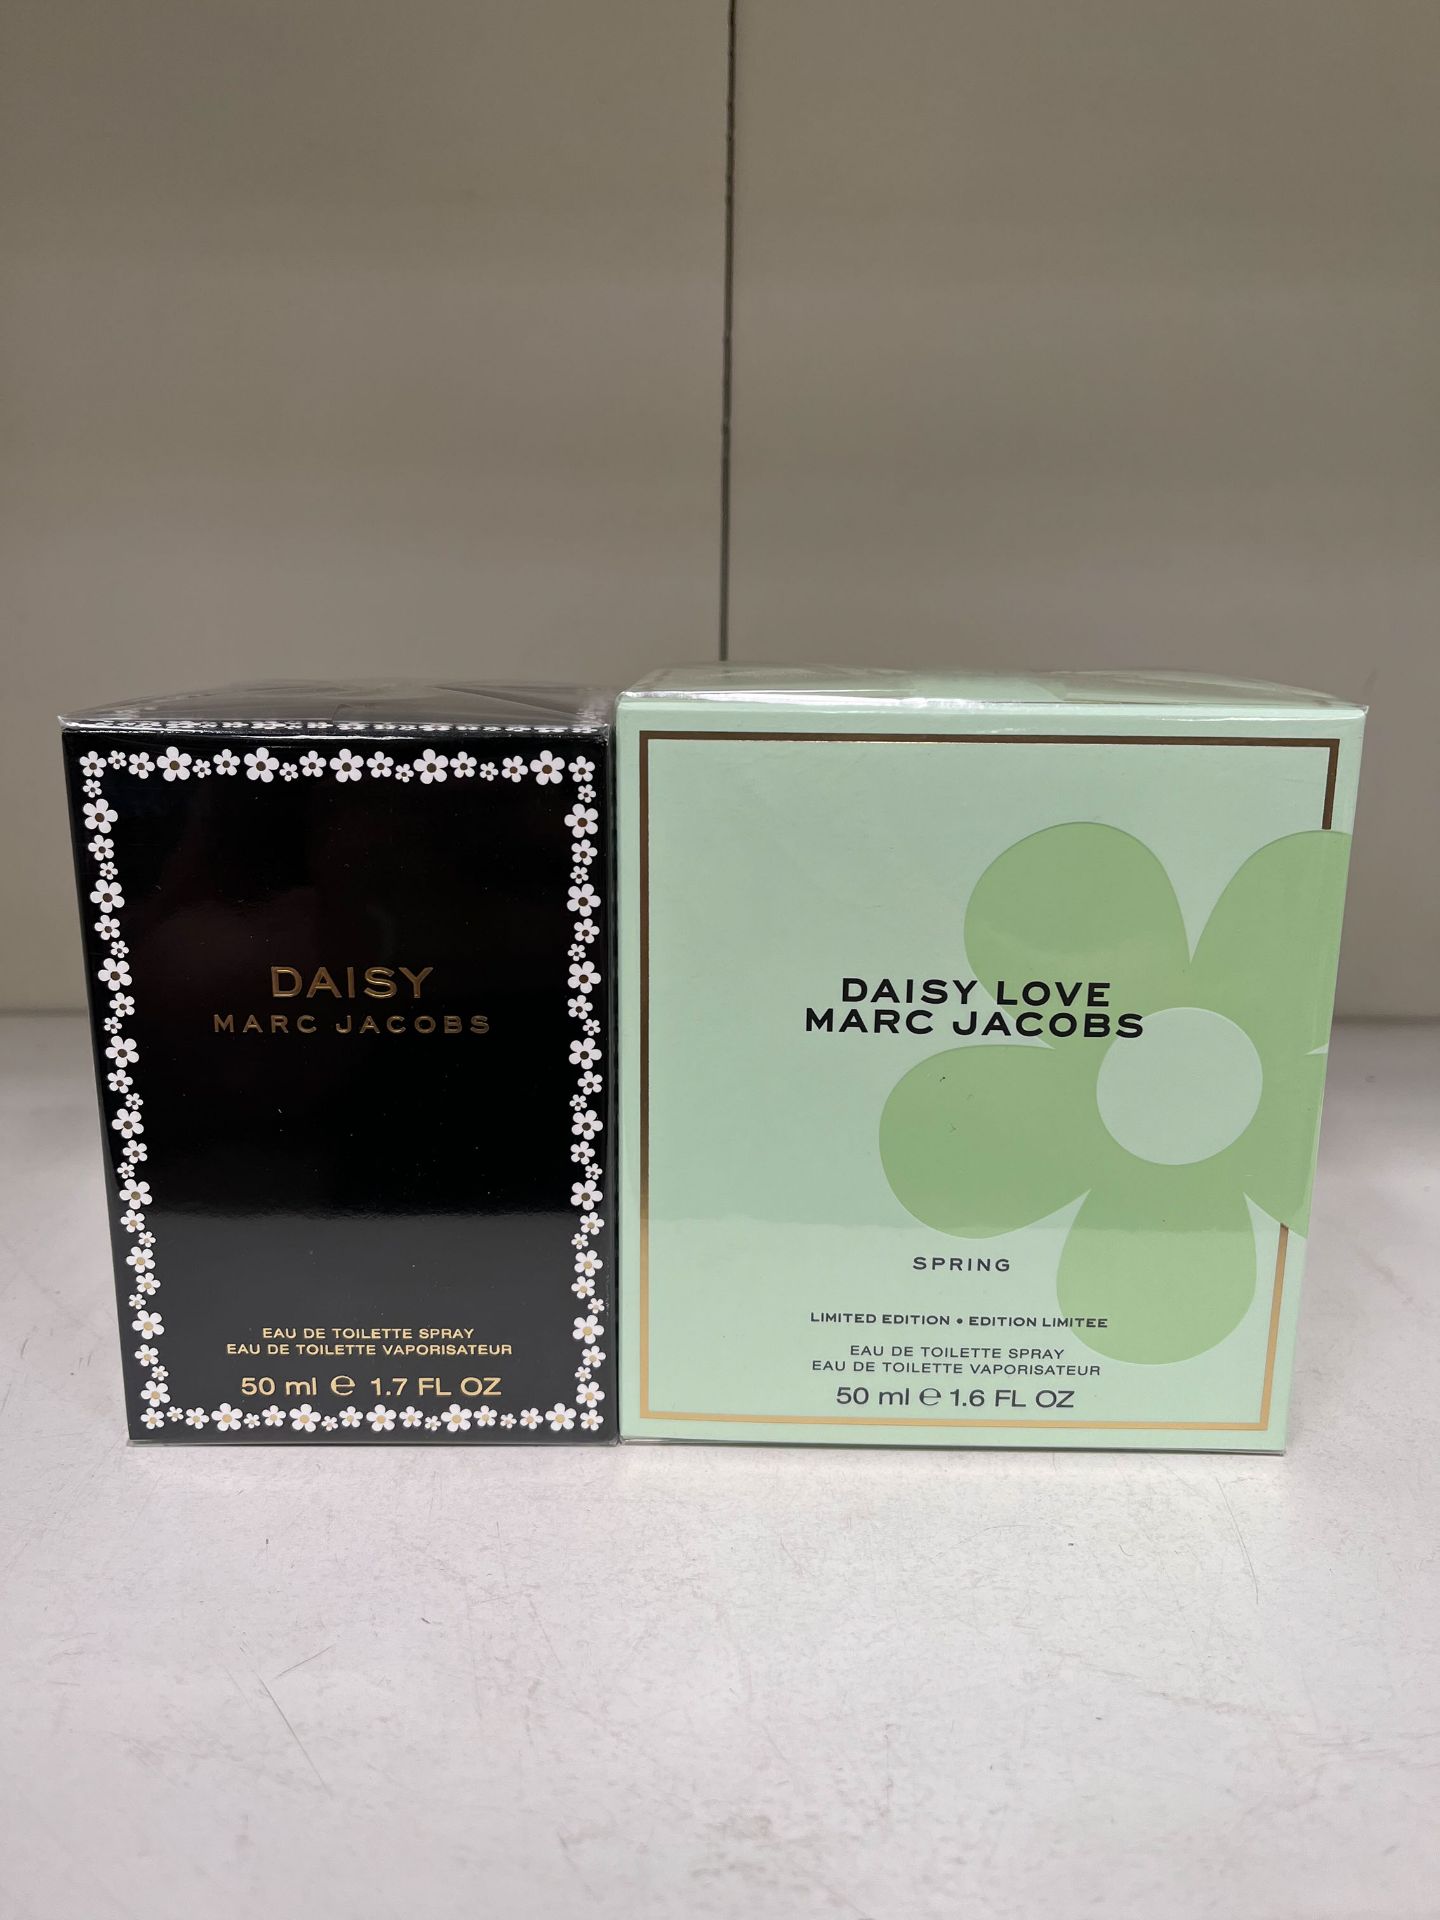 1x 50ml Marc Jacobs Daisy, 1x 50ml Marc Jacobs Daisy Love Spring Limited Edition